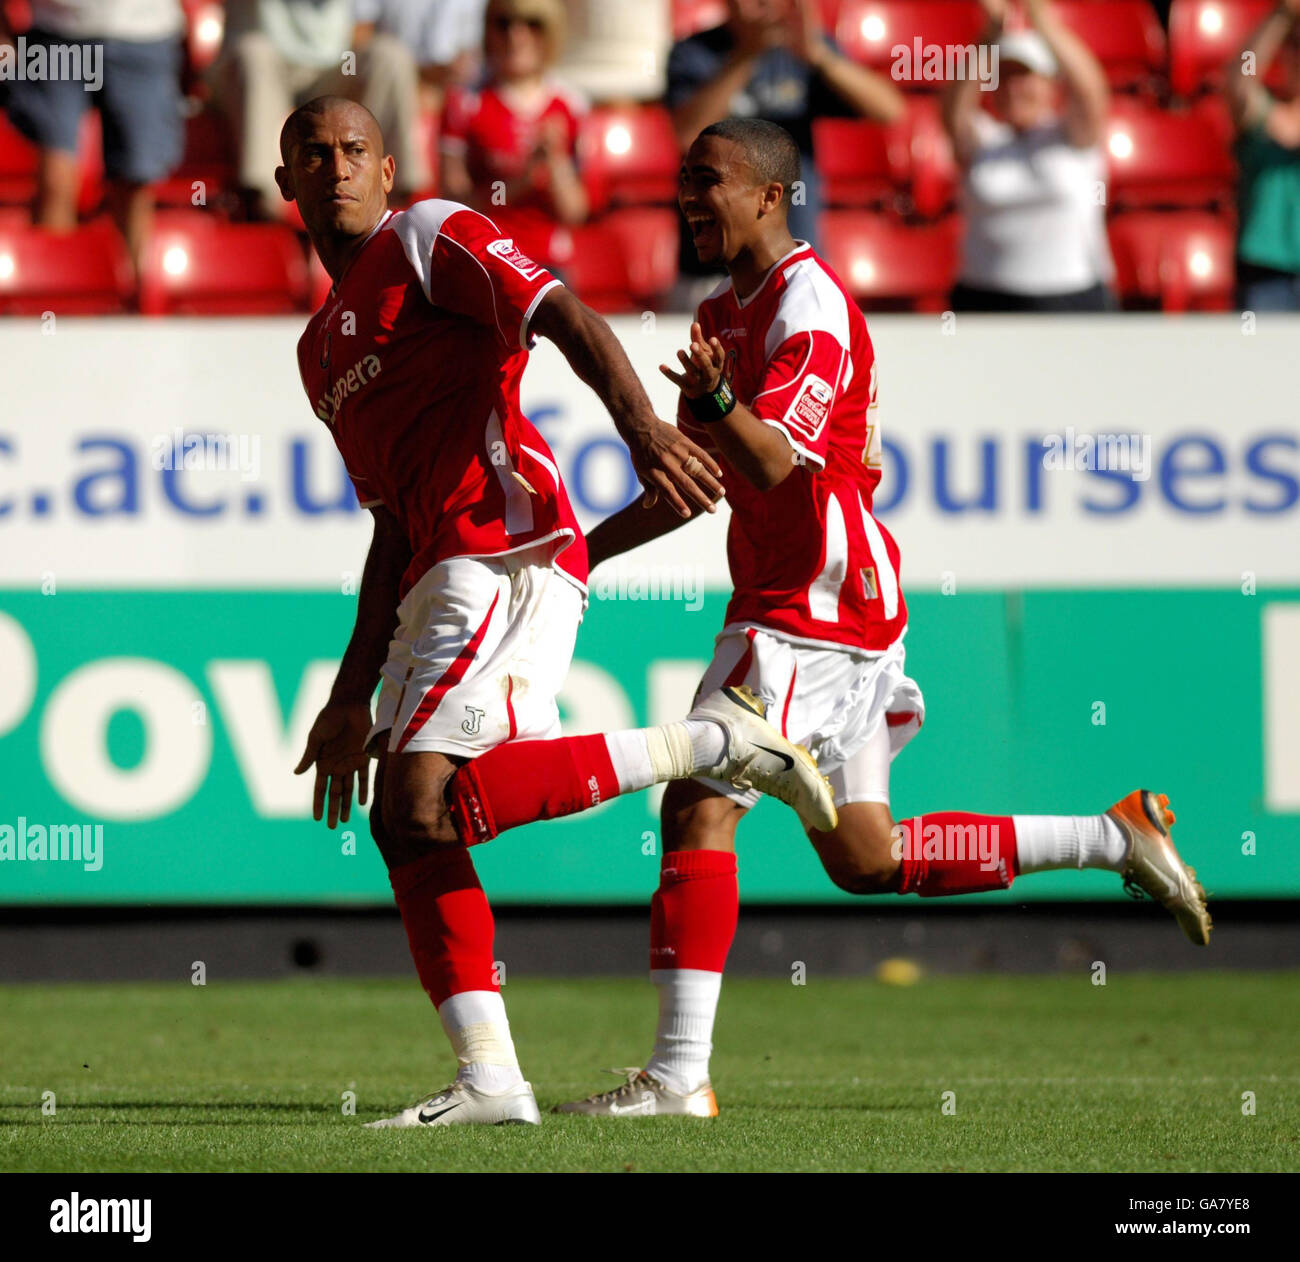 Charlton Athletic's Chris Iwelumo celebrates his first goal during the Coca-Cola Football League Championship match at The Valley, London. Stock Photo